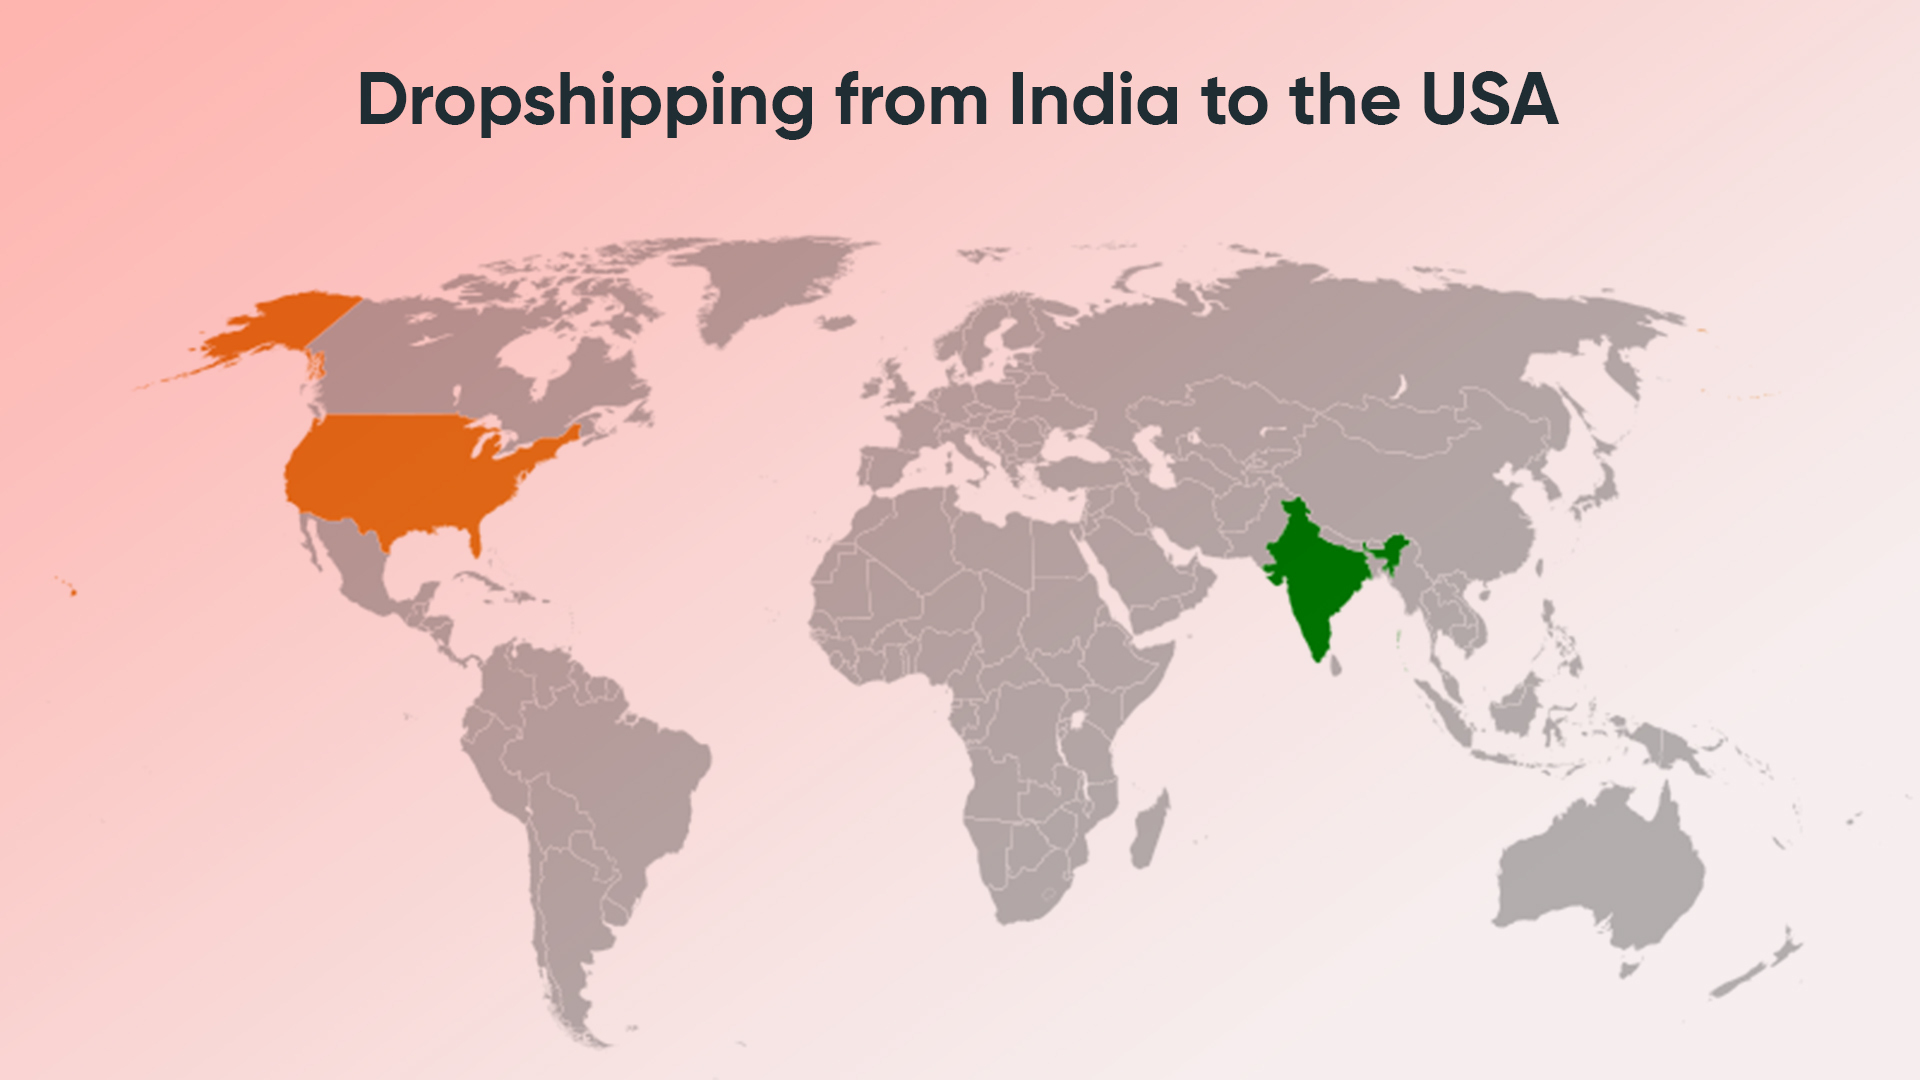 Dropshipping from India to the USA